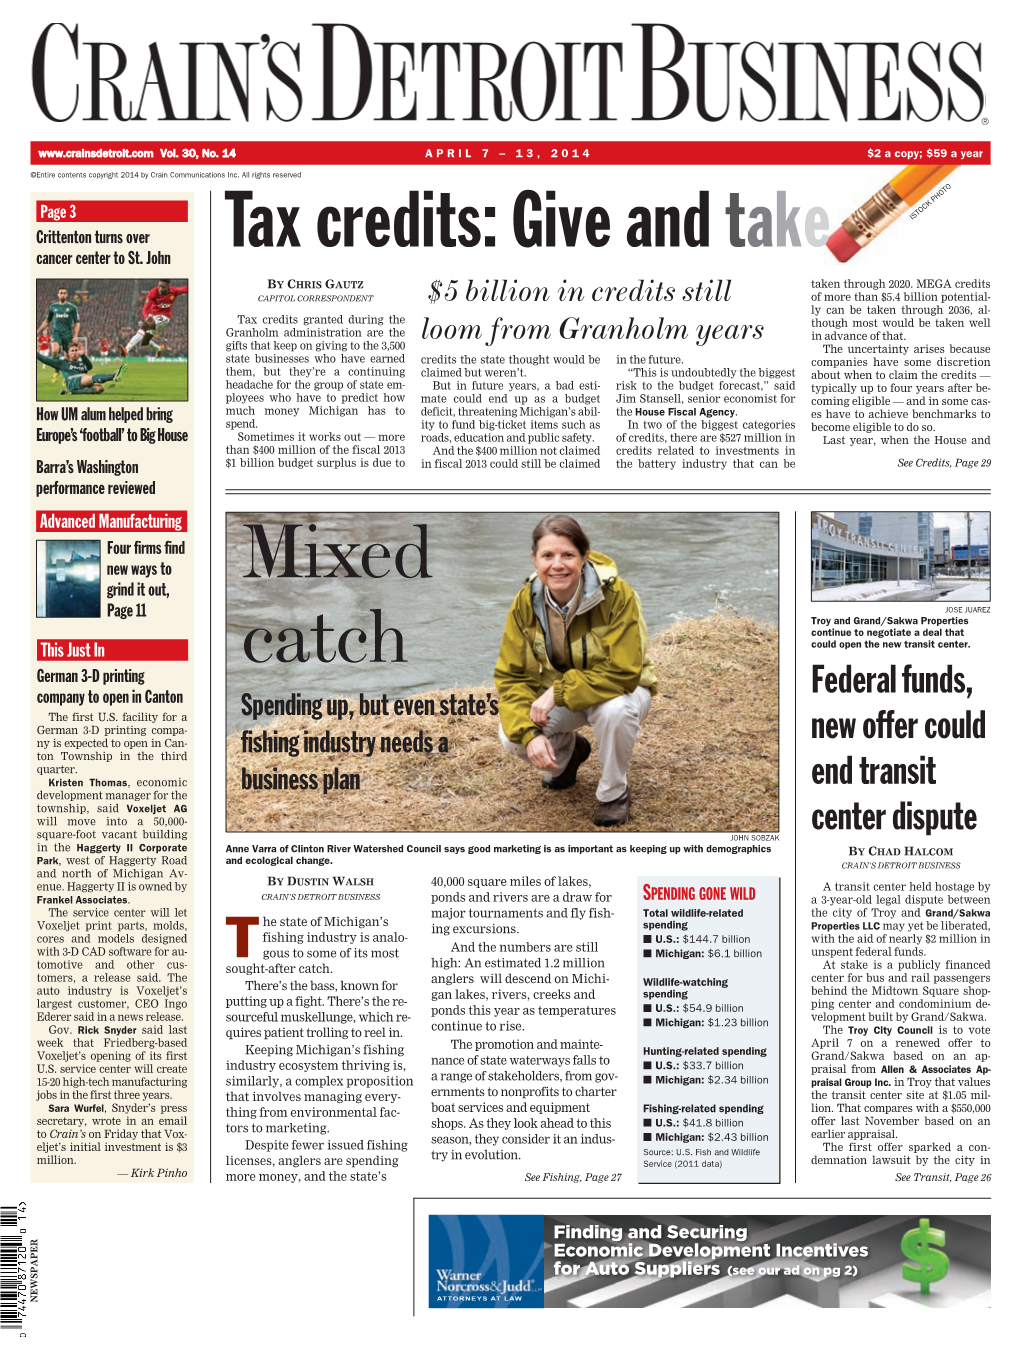 Tax Credits: Give and Take Mixed Catch